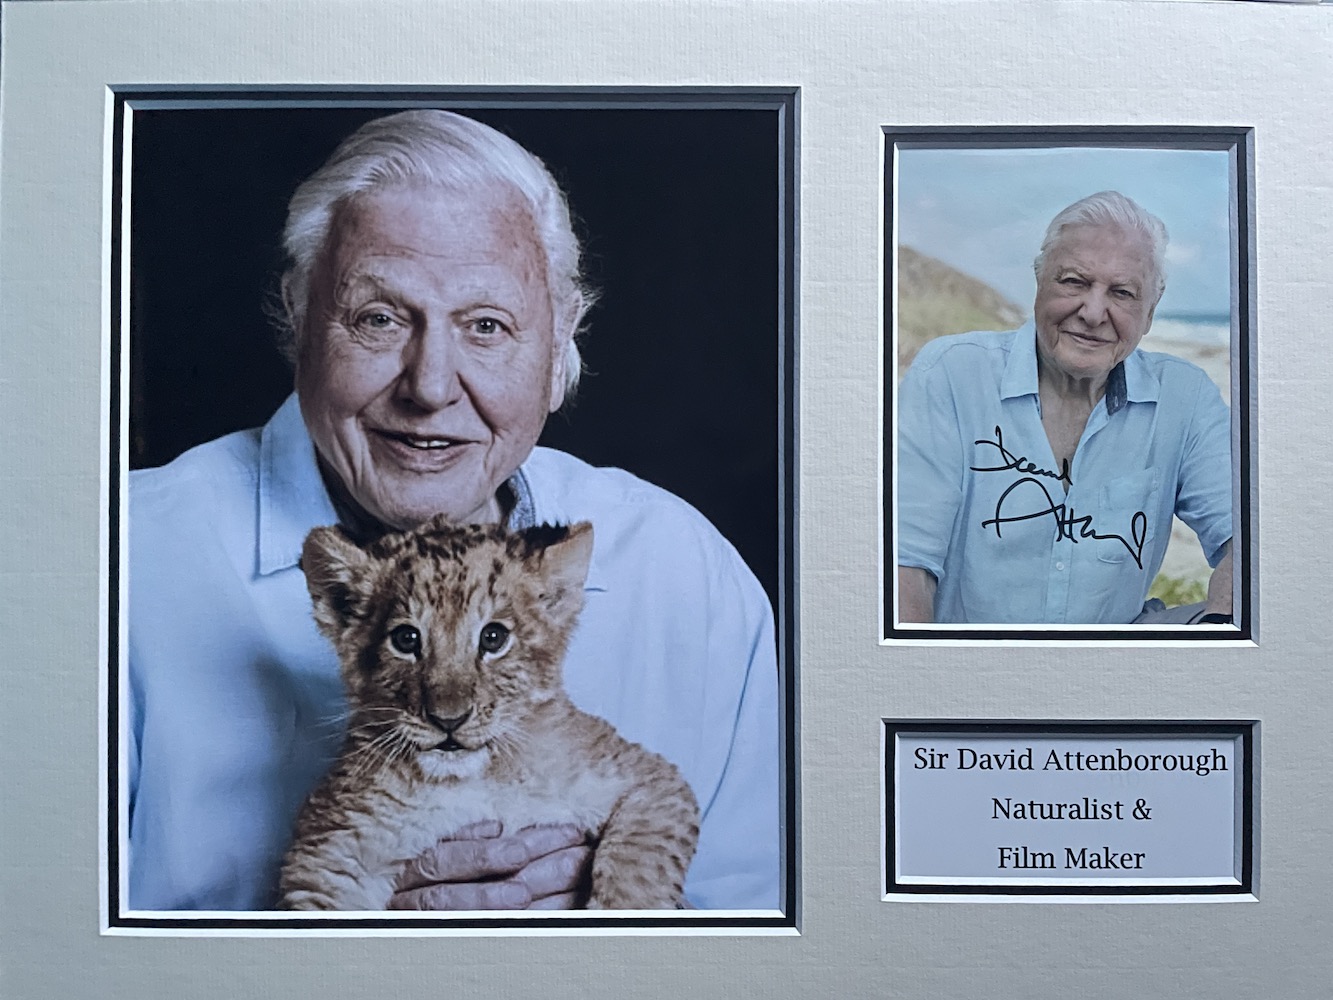 David Attenborough Wildlife Film Maker Signed Display. Good Condition. All autographs come with a